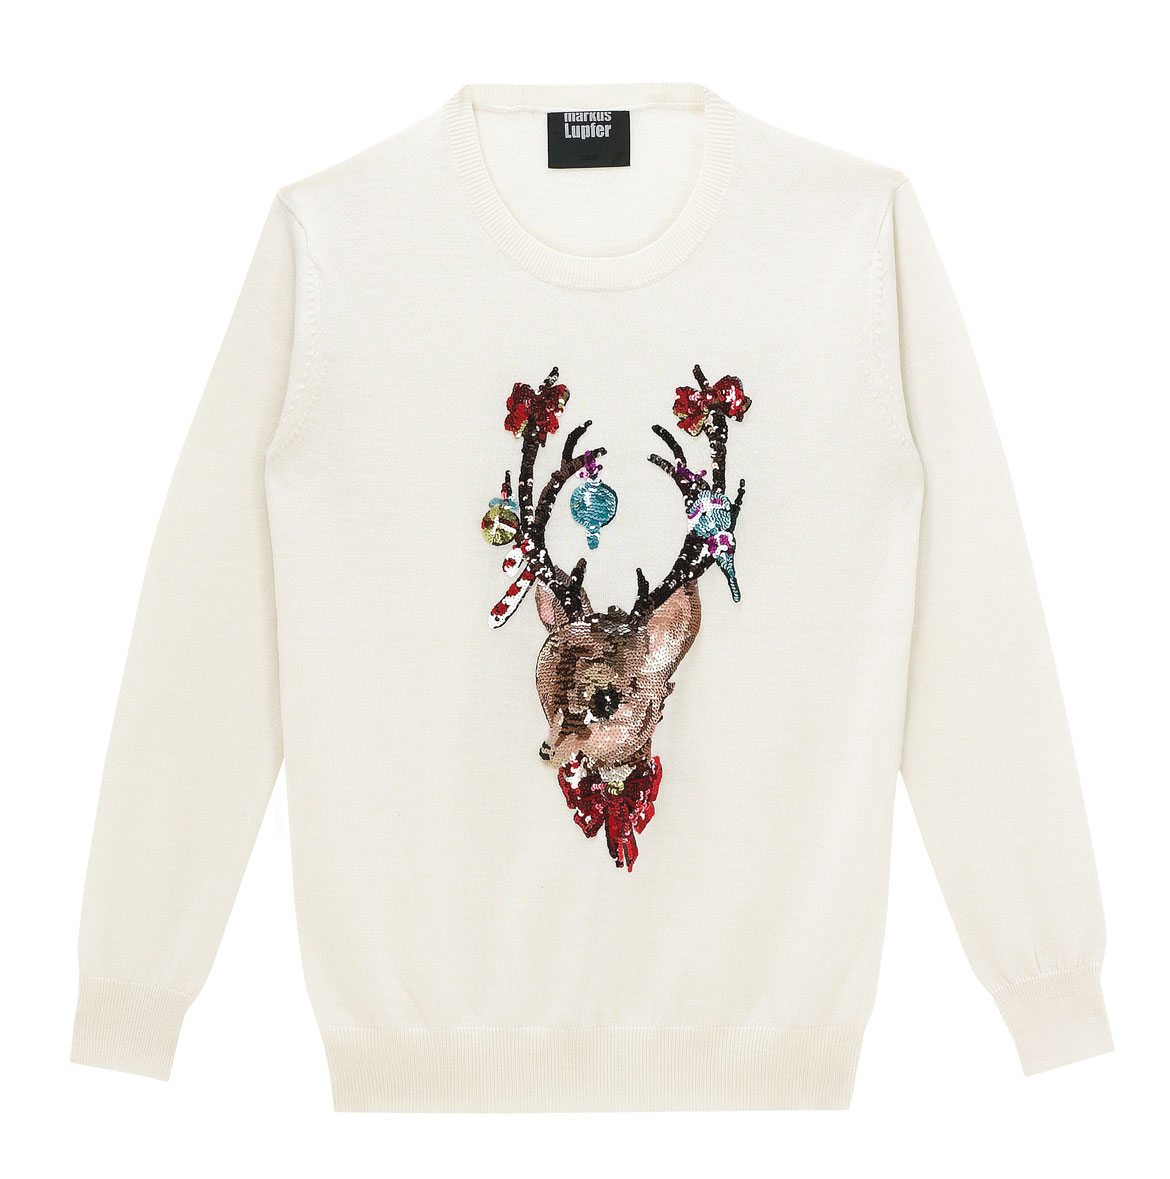 10 of the Best Christmas Jumpers | Style Guide